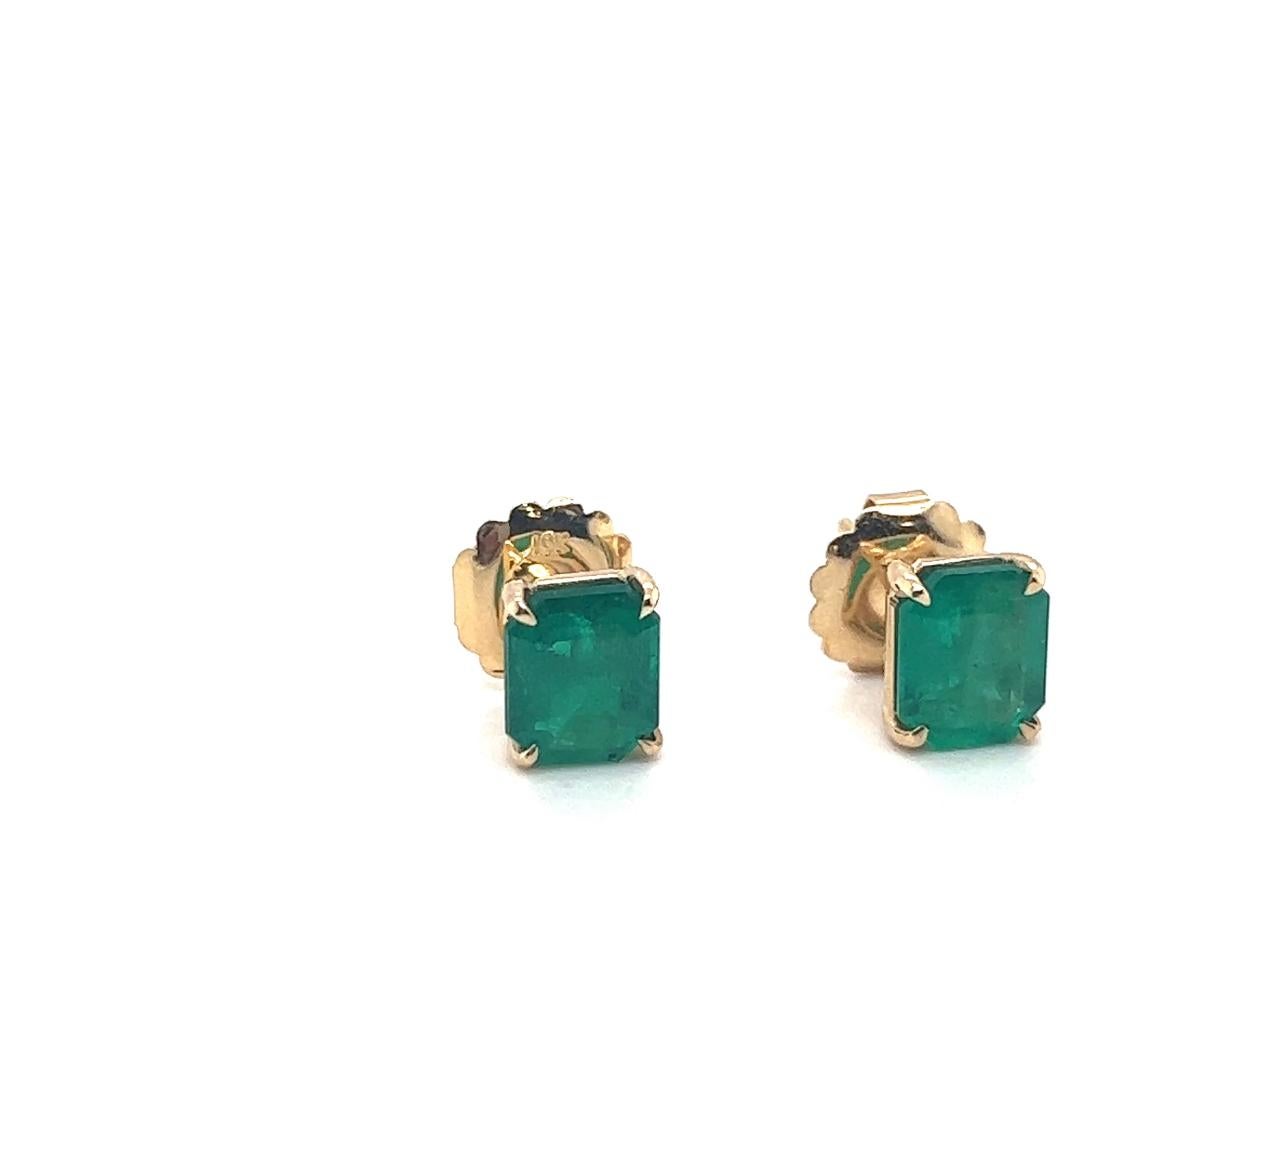 4 Carat Colombian Emerald Cut Stud Earrings 18k Yellow Gold In Excellent Condition For Sale In Miami, FL